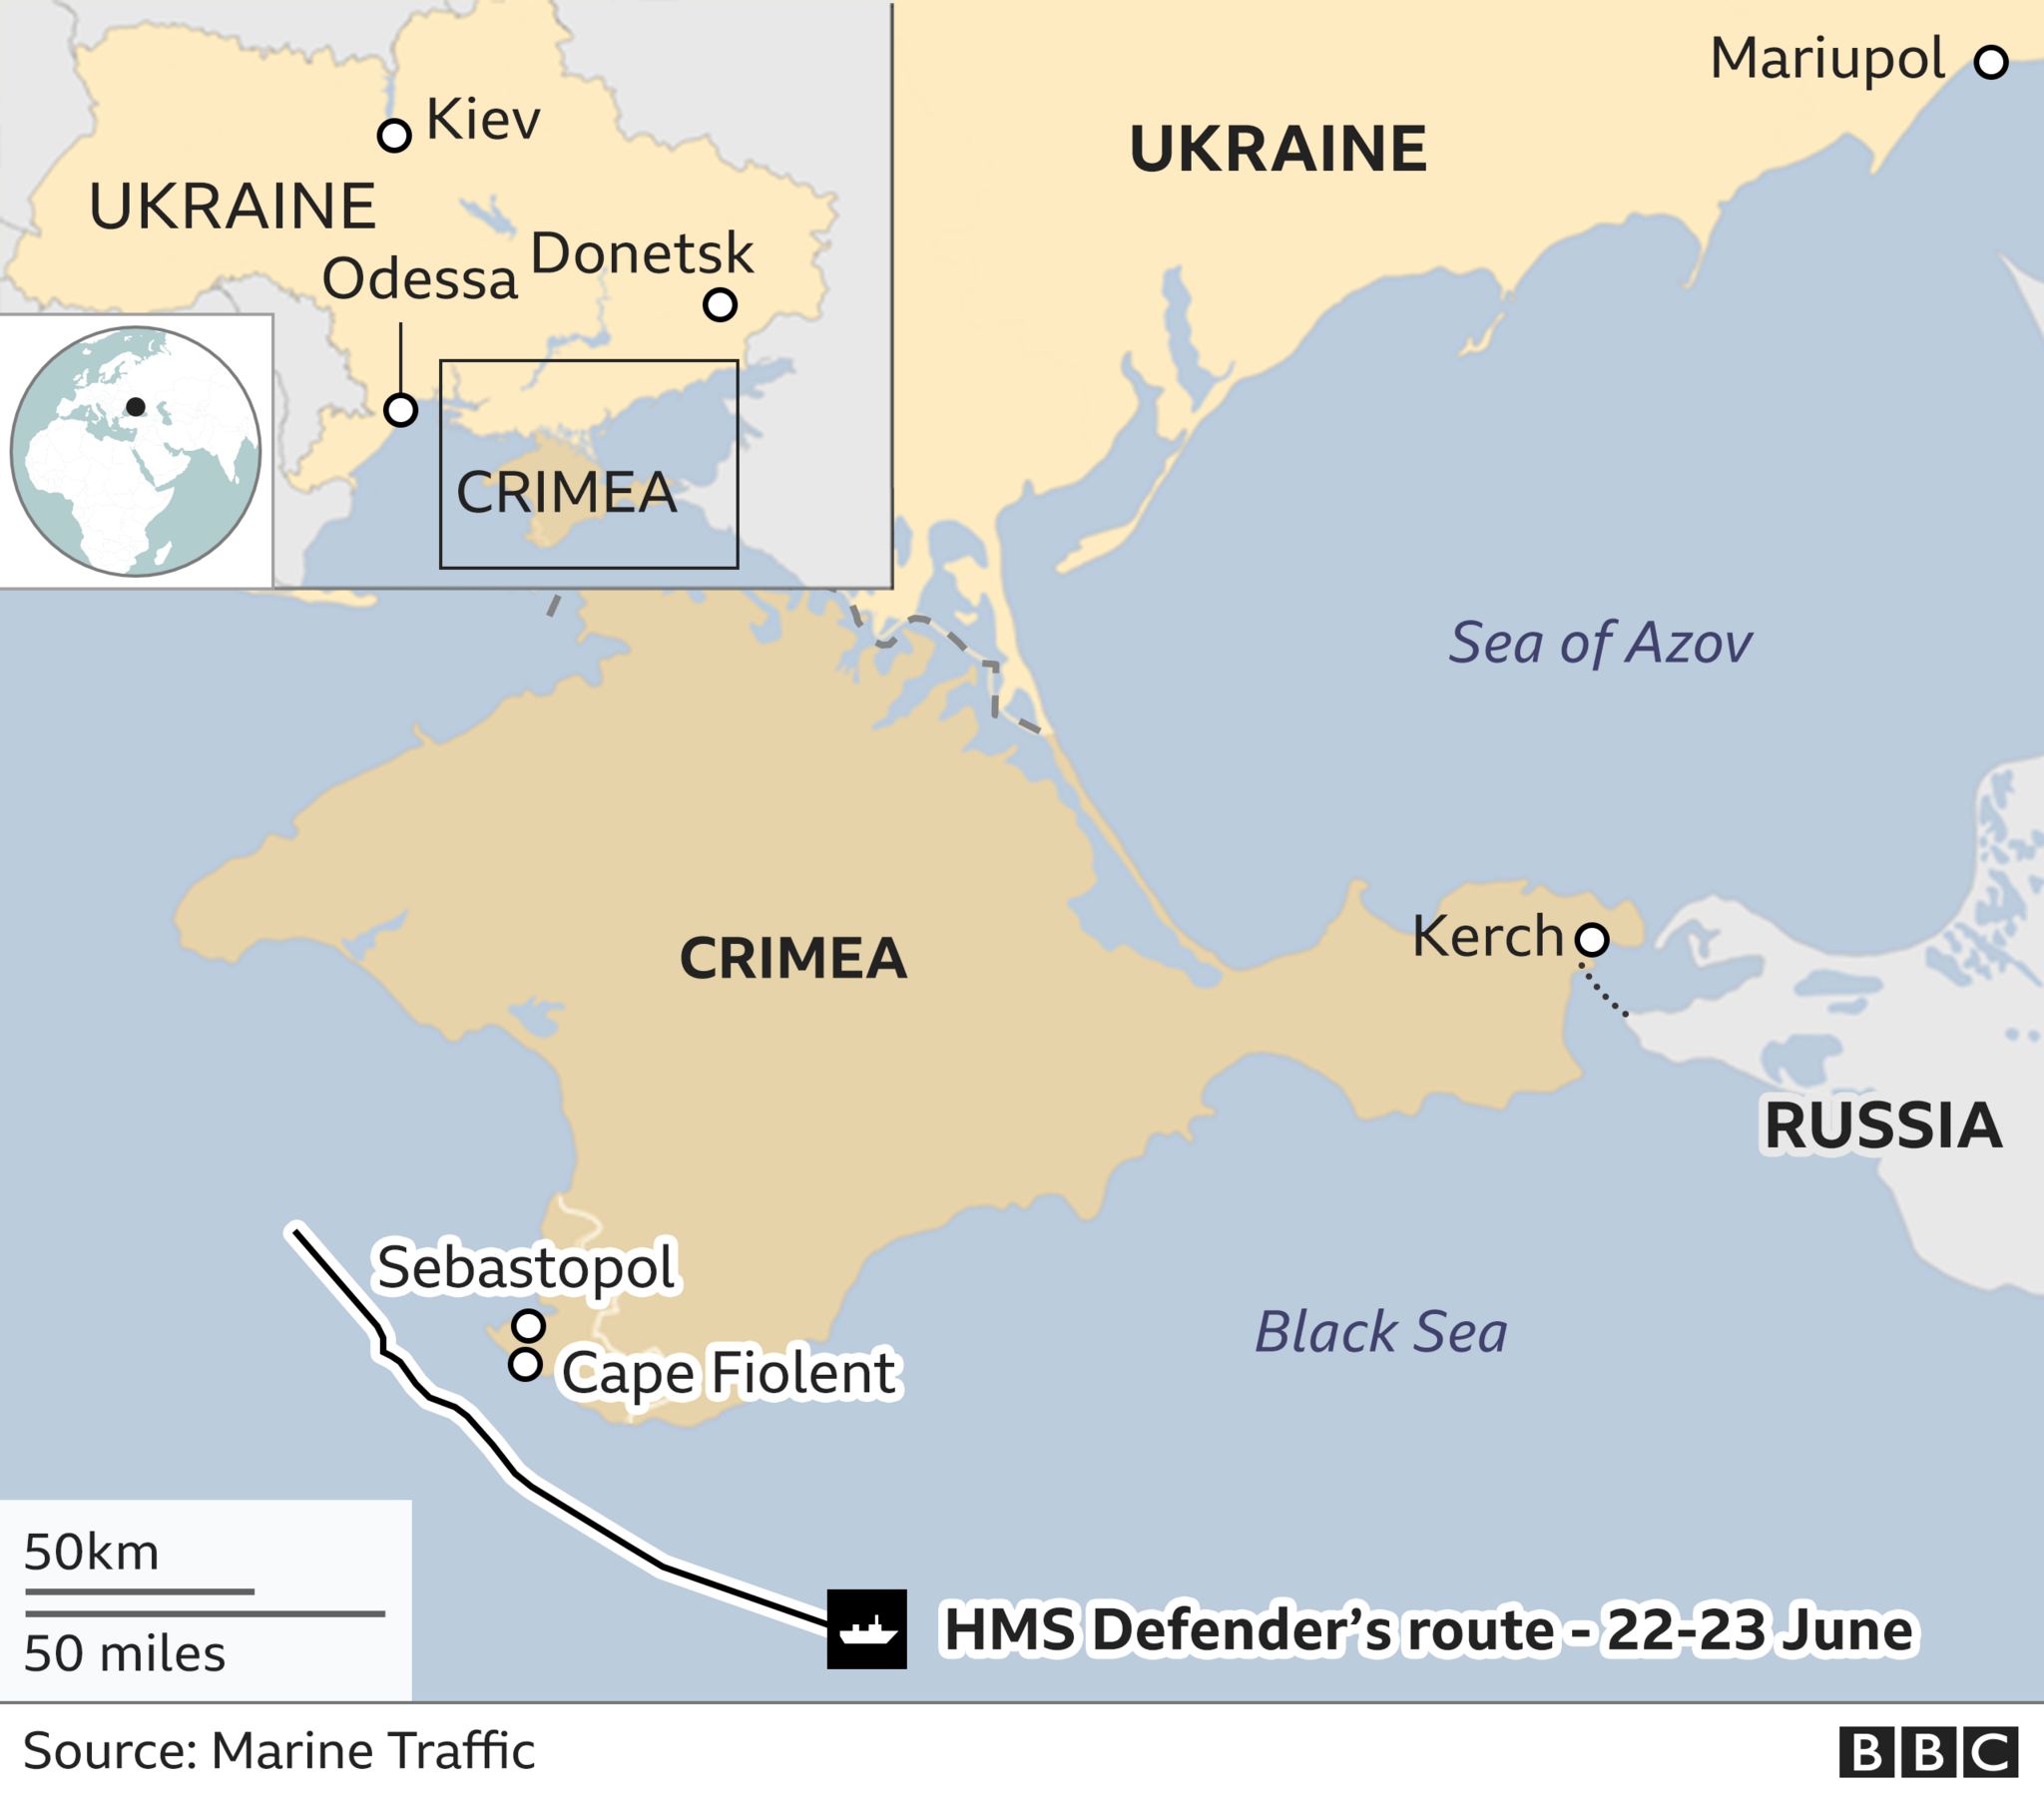 Map showing Russia, Ukraine, Crimea and the route HMS Defender took